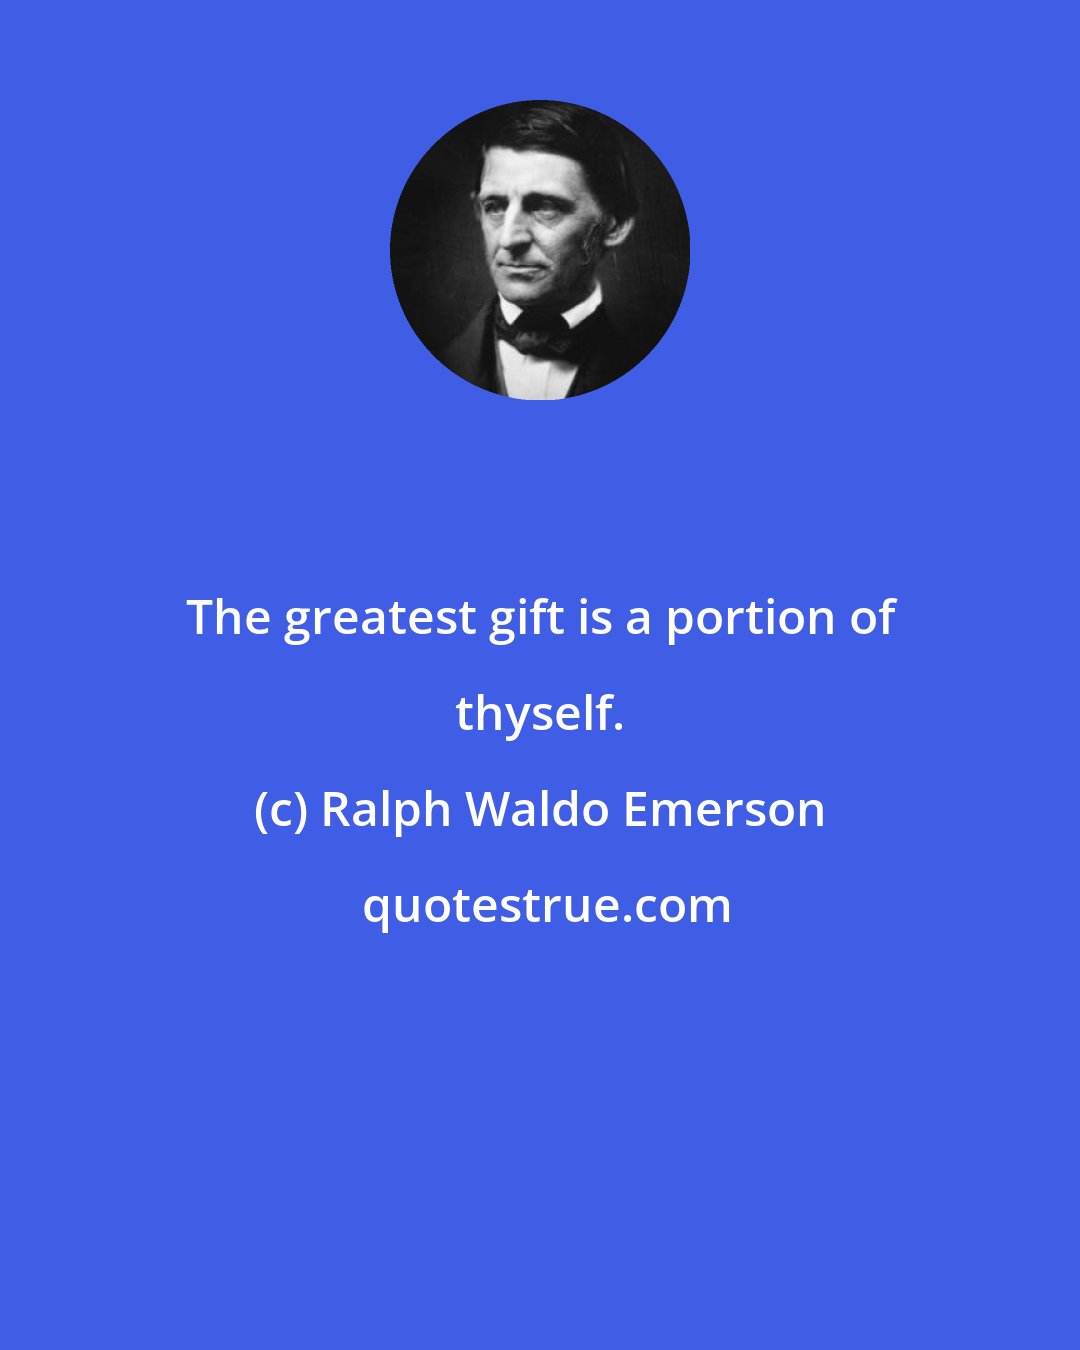 Ralph Waldo Emerson: The greatest gift is a portion of thyself.